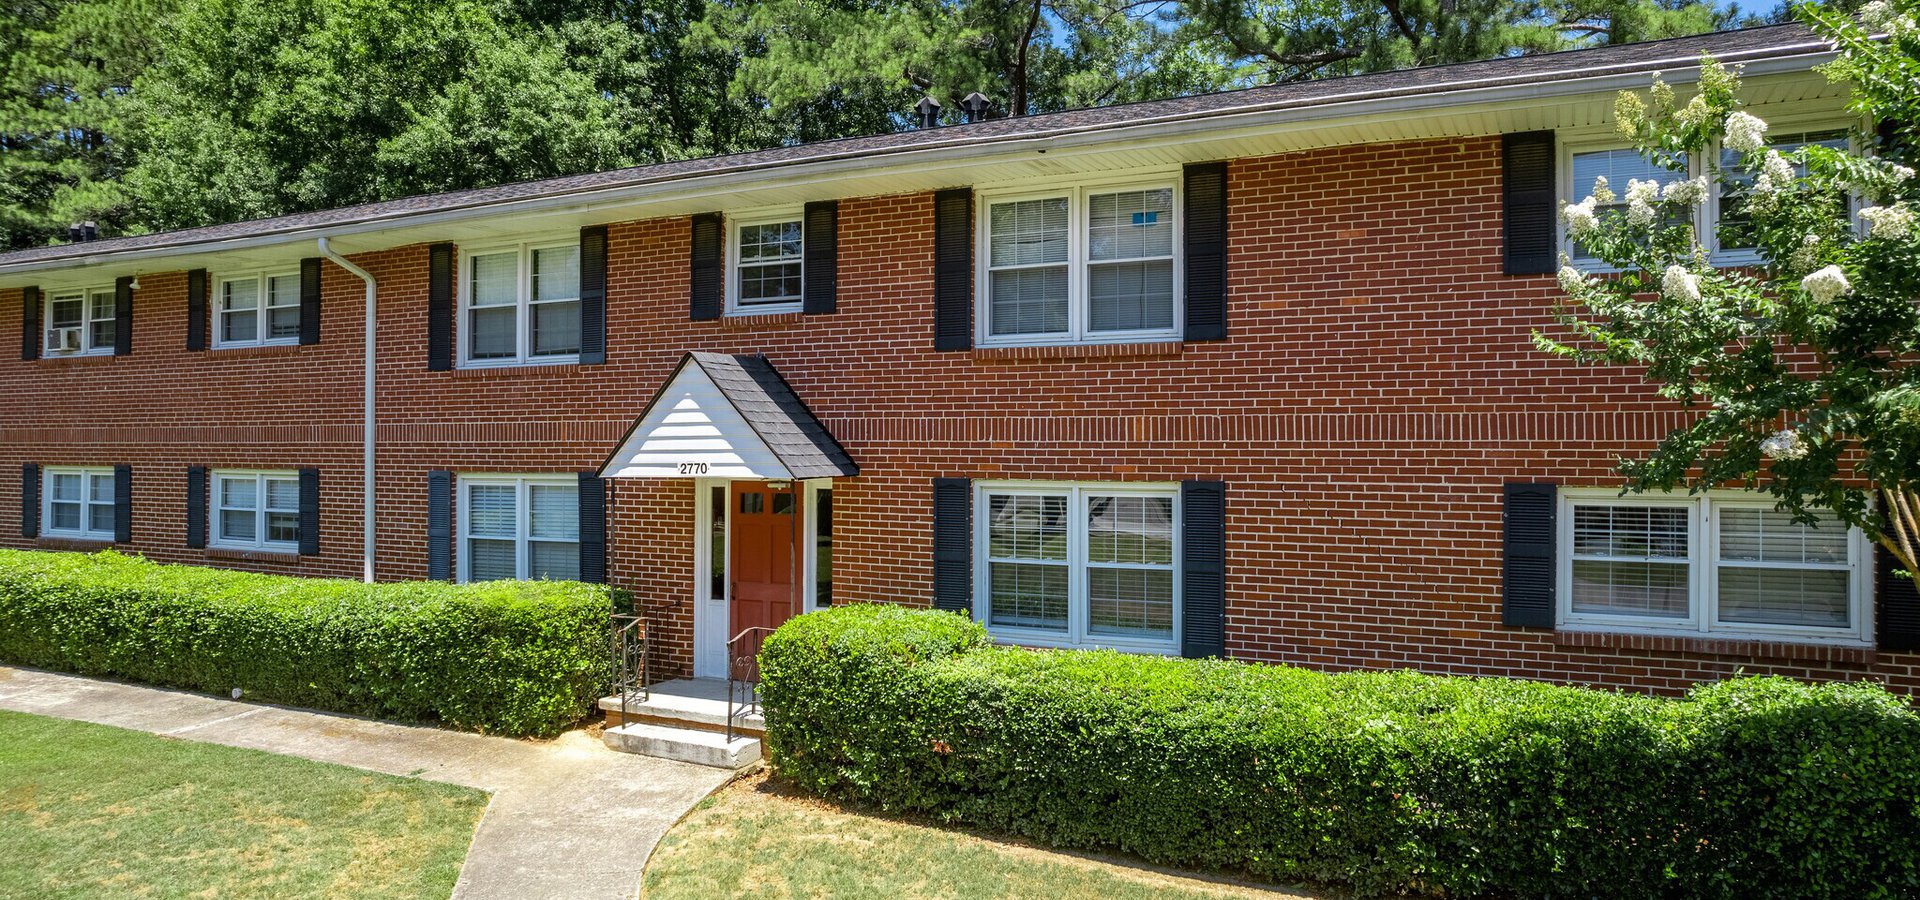 exterior building at Drew Valley apartments in Brookhaven, GA  30319